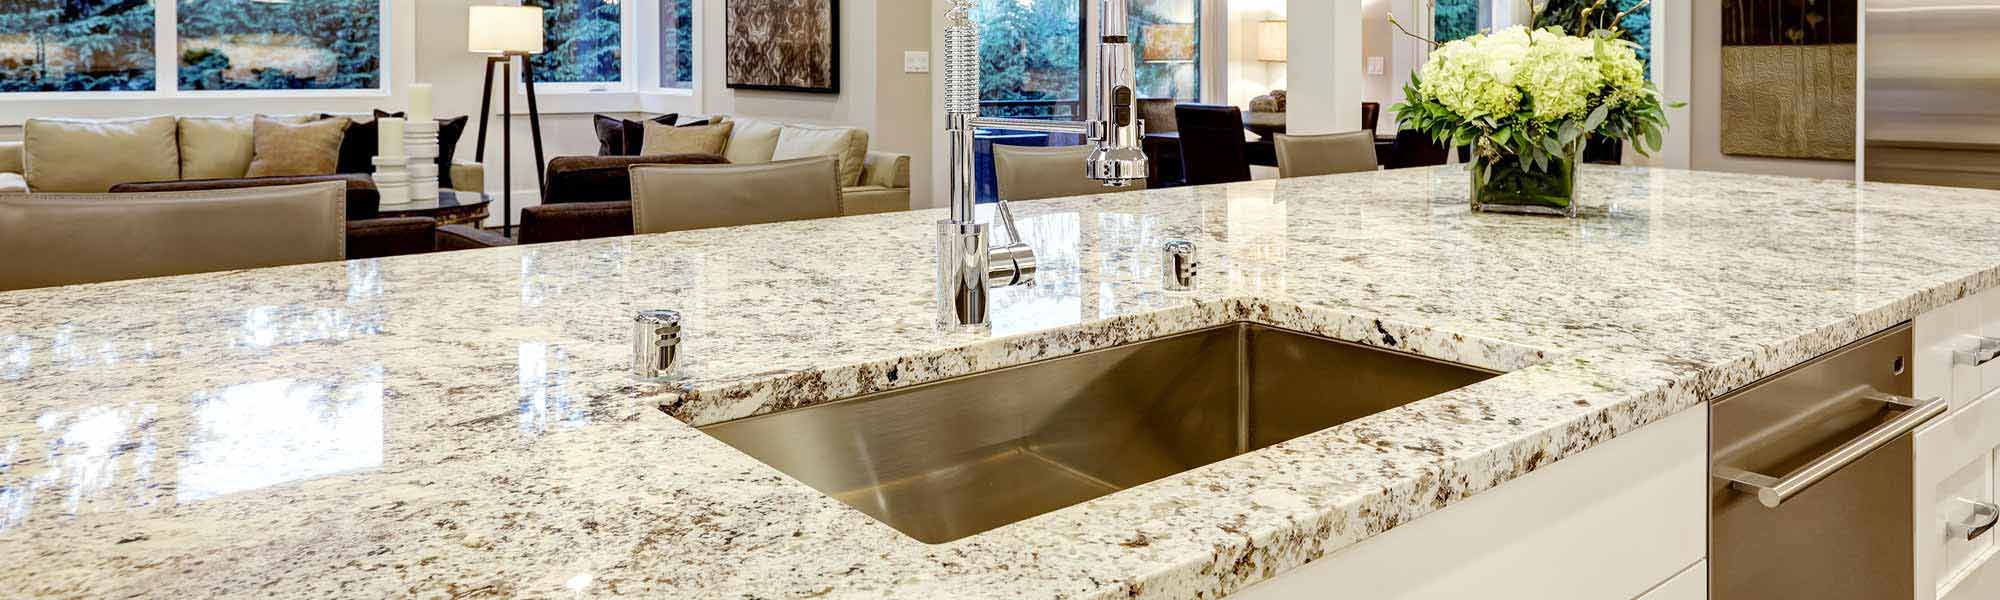 Chem-Dry Clearwater/Largo Granite Countertop Renewal Services